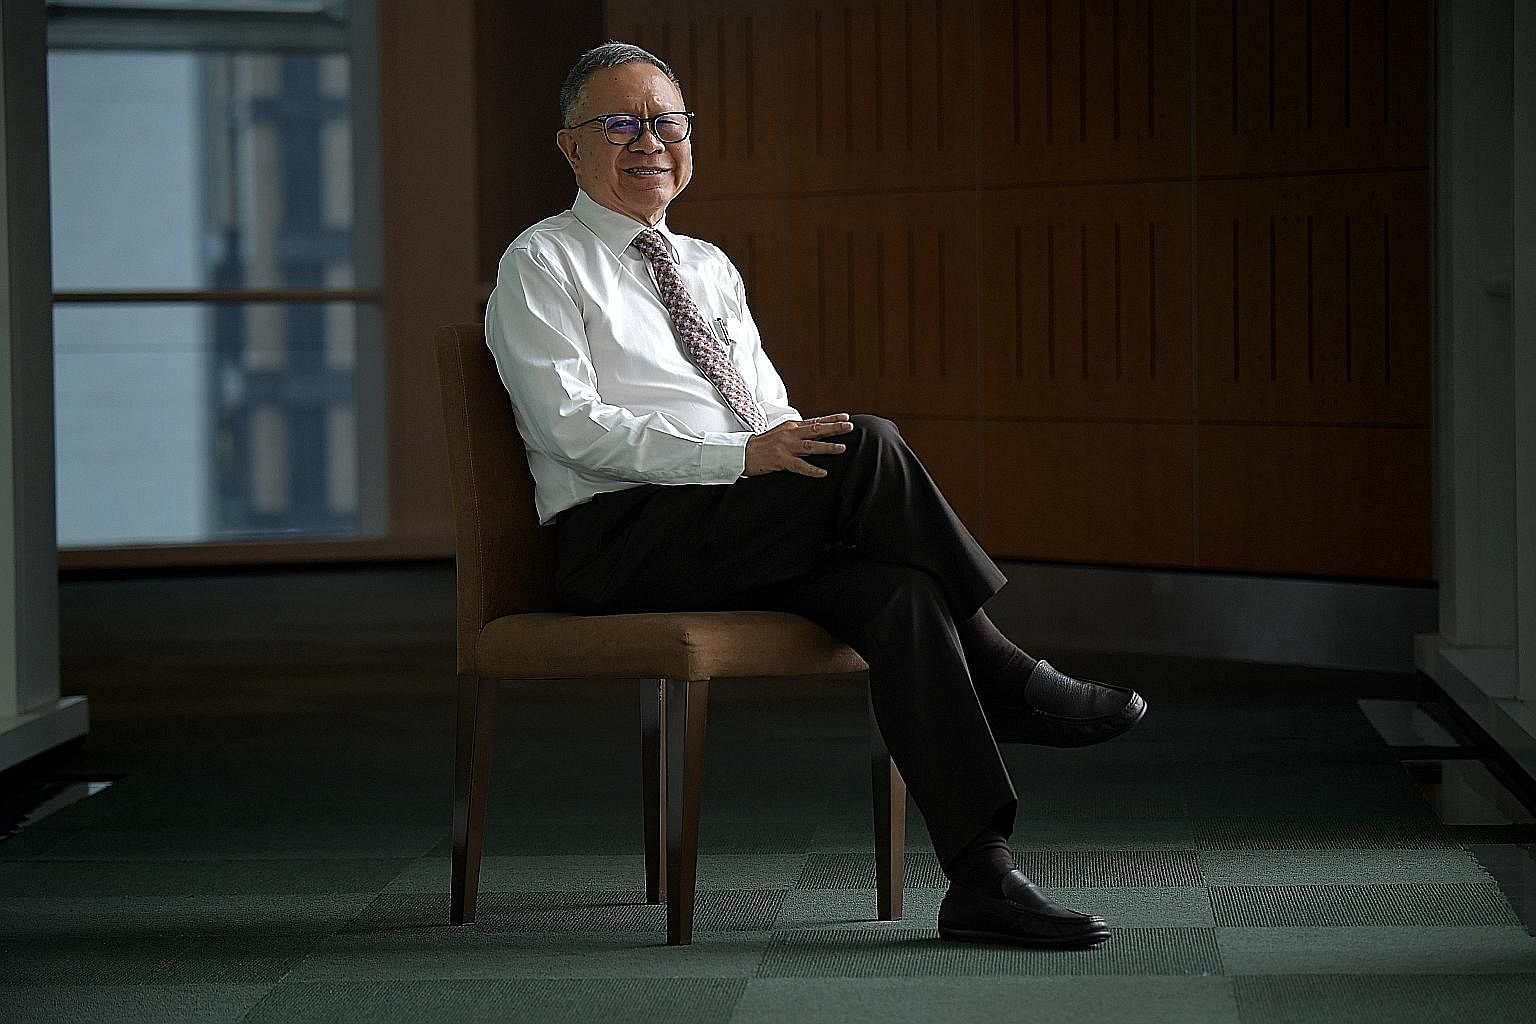 As chairman of the Public Service Commission since 2008, Mr Eddie Teo interviews about 350 students seeking government scholarships every year, among other responsibilities. His long career in public service has also seen him at one point serving as 